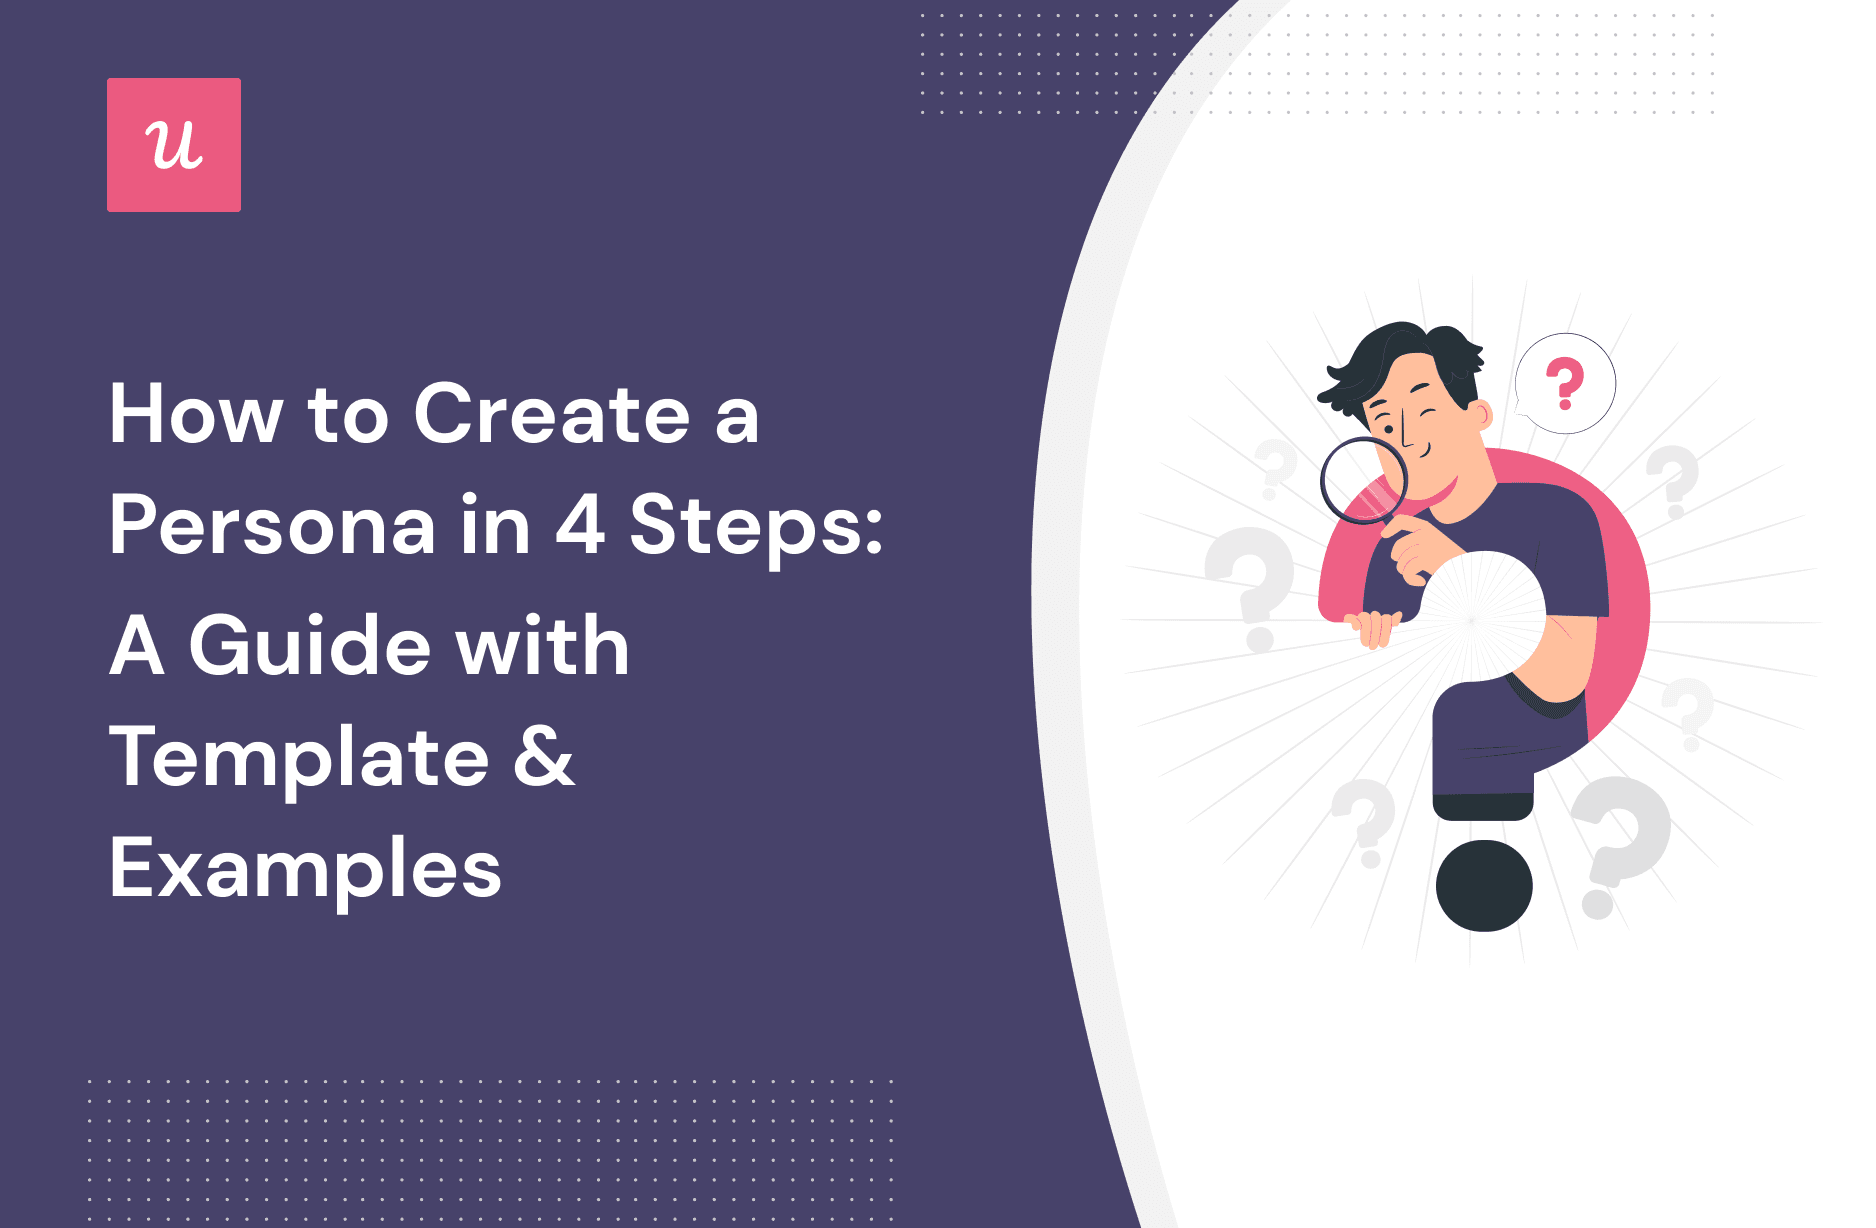 How to Create a Persona in 4 Steps: A Guide with Template & Examples cover